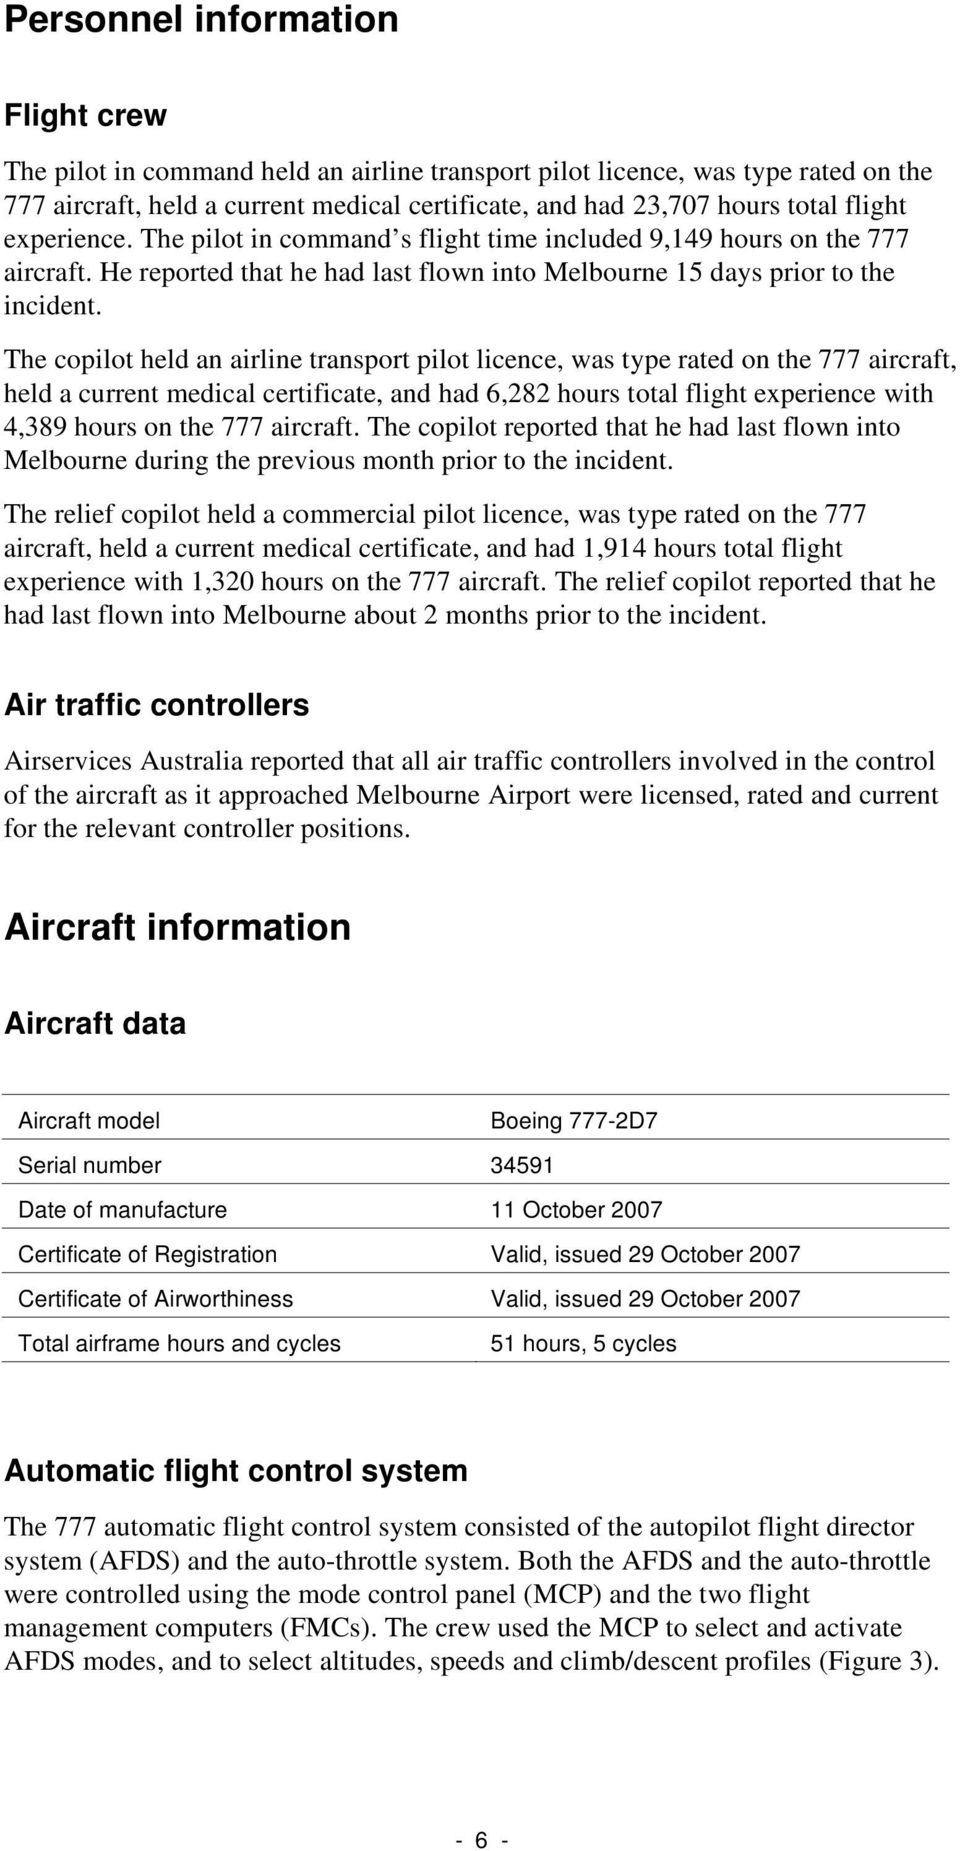 The copilot held an airline transport pilot licence, was type rated on the 777 aircraft, held a current medical certificate, and had 6,282 hours total flight experience with 4,389 hours on the 777